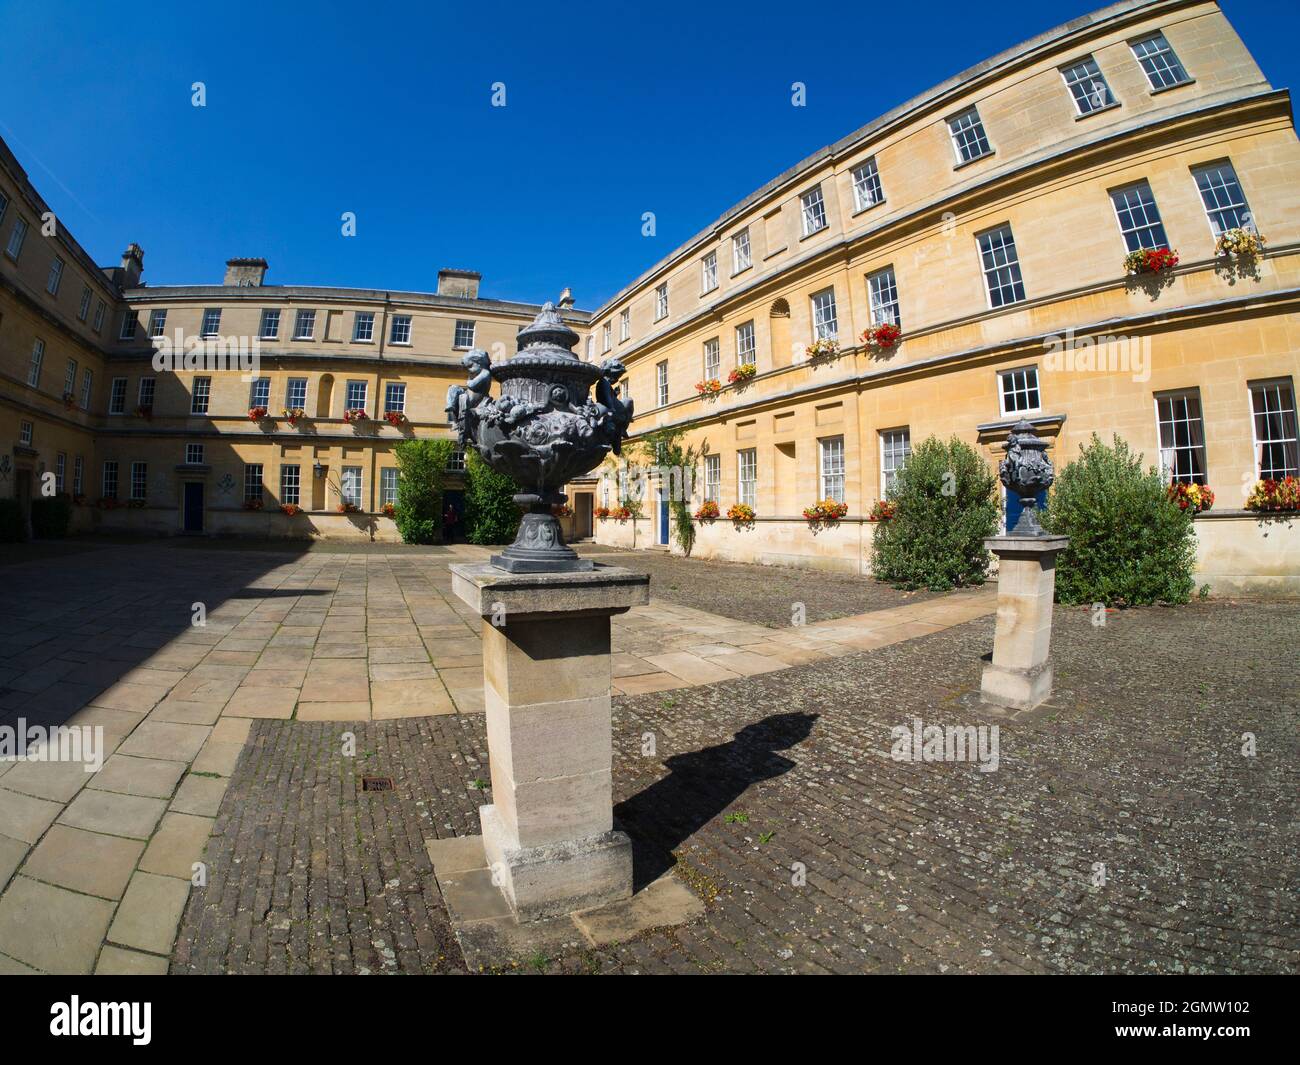 Oxford, England - 20 September 2013; no people in view. The garden Quadrangle of Trinity College of Oxford University, England.This relatively large a Stock Photo